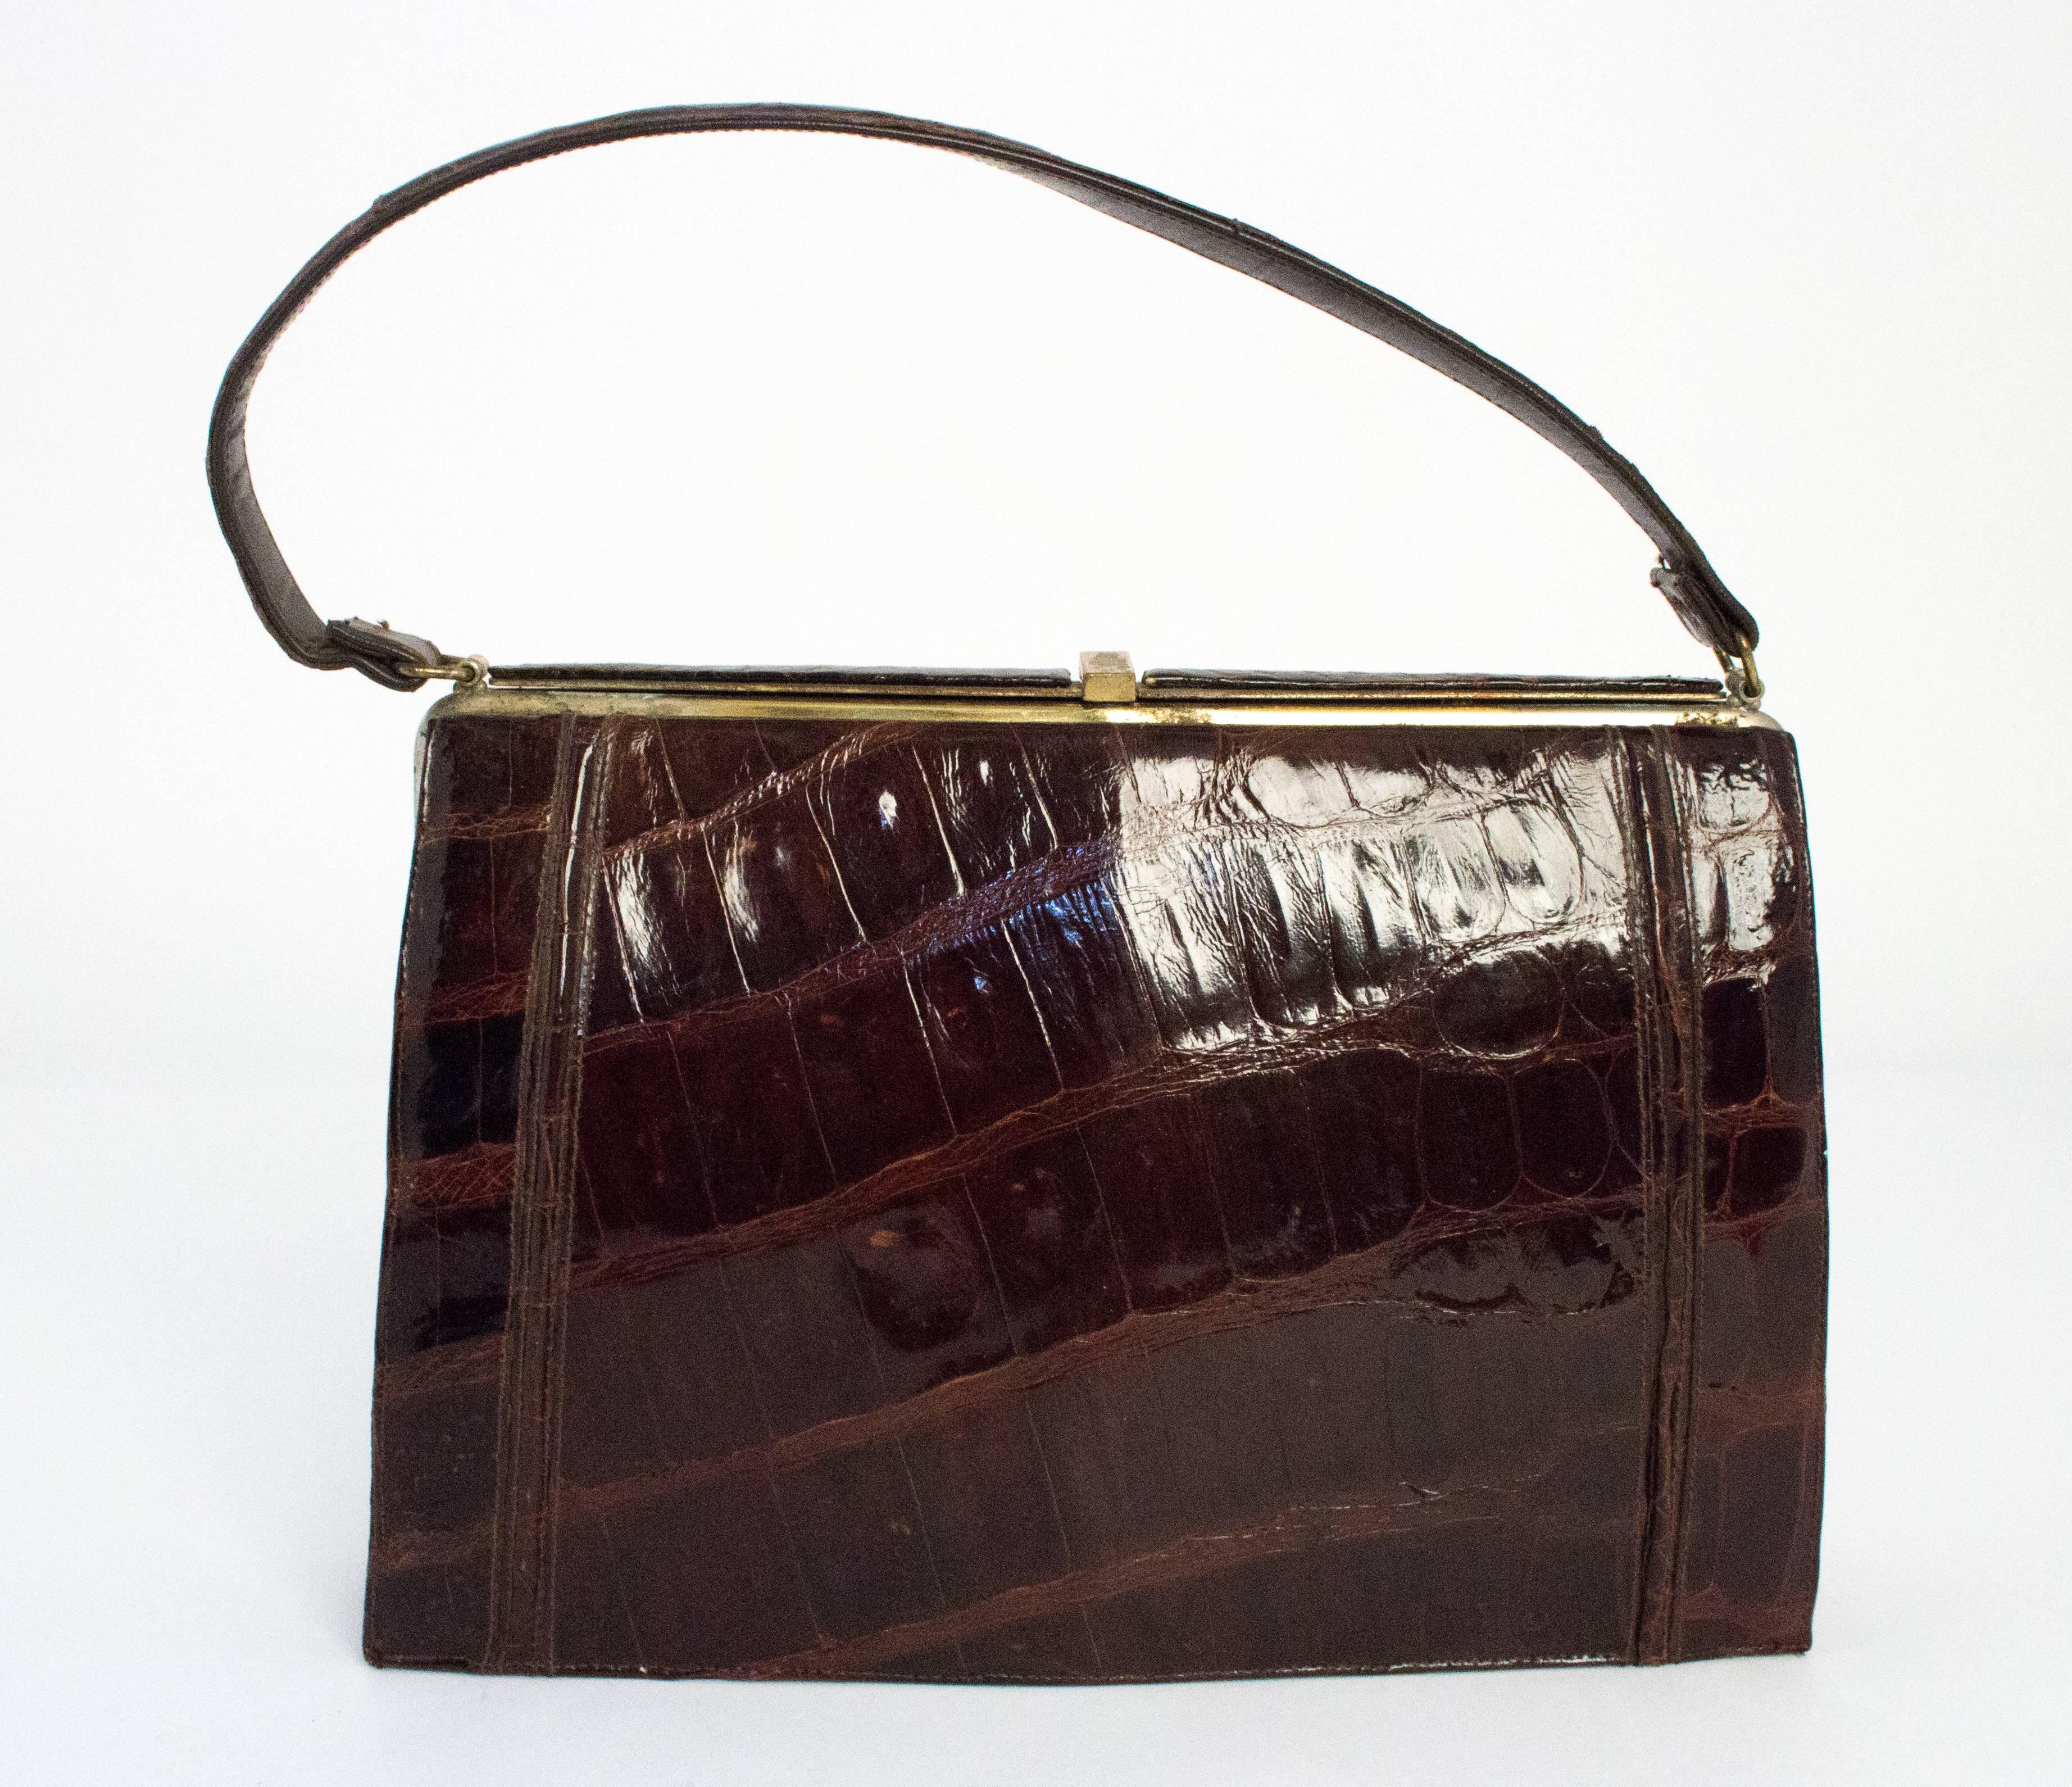 1960s chocolate brown alligator purse. Gold toned hardware. Leather lining. Two side pockets.

Strap length: 17